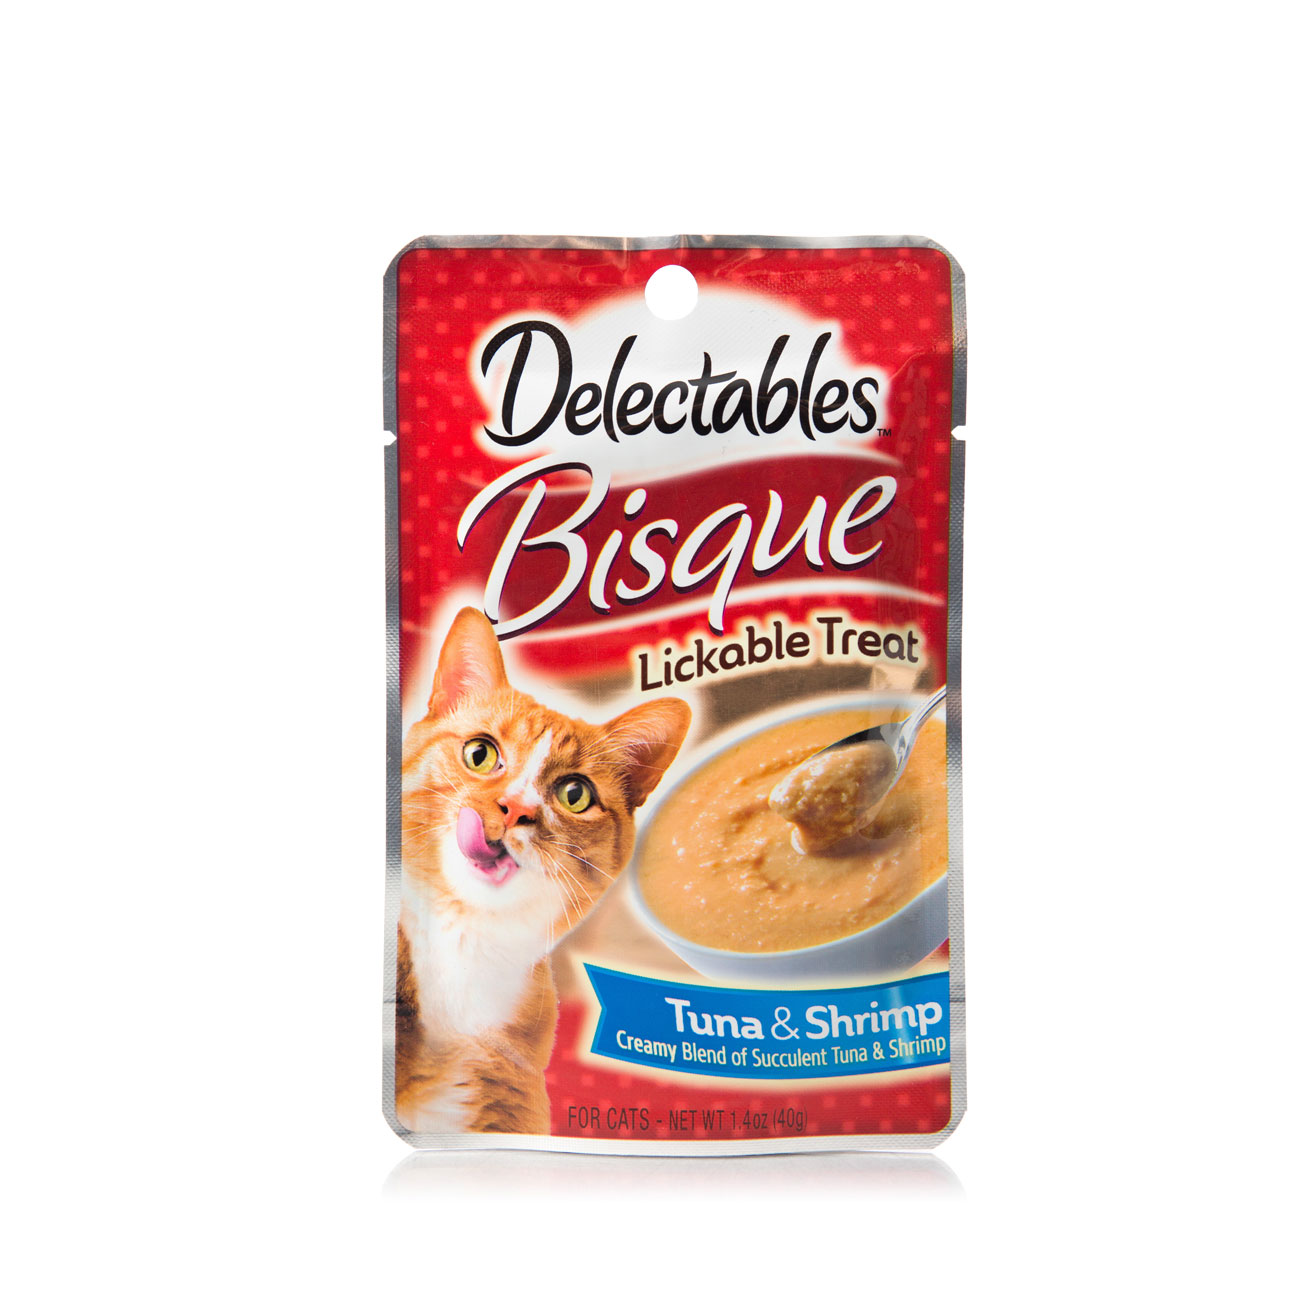 Hartz Delectables Lickable Treat for cats, front of package. Tuna and Shrimp Bisque.